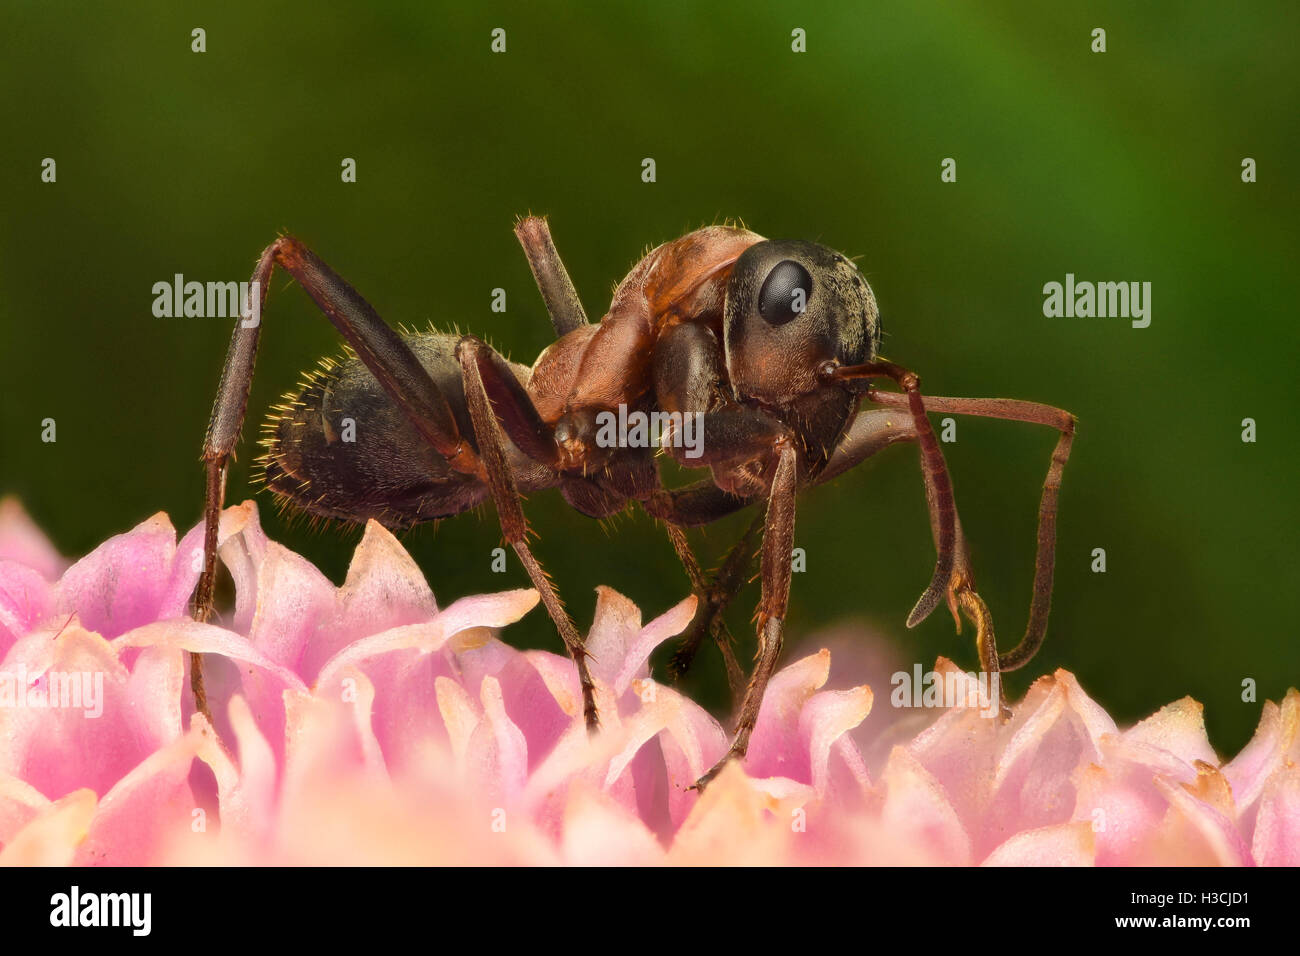 High magnification - Ant on flower Stock Photo